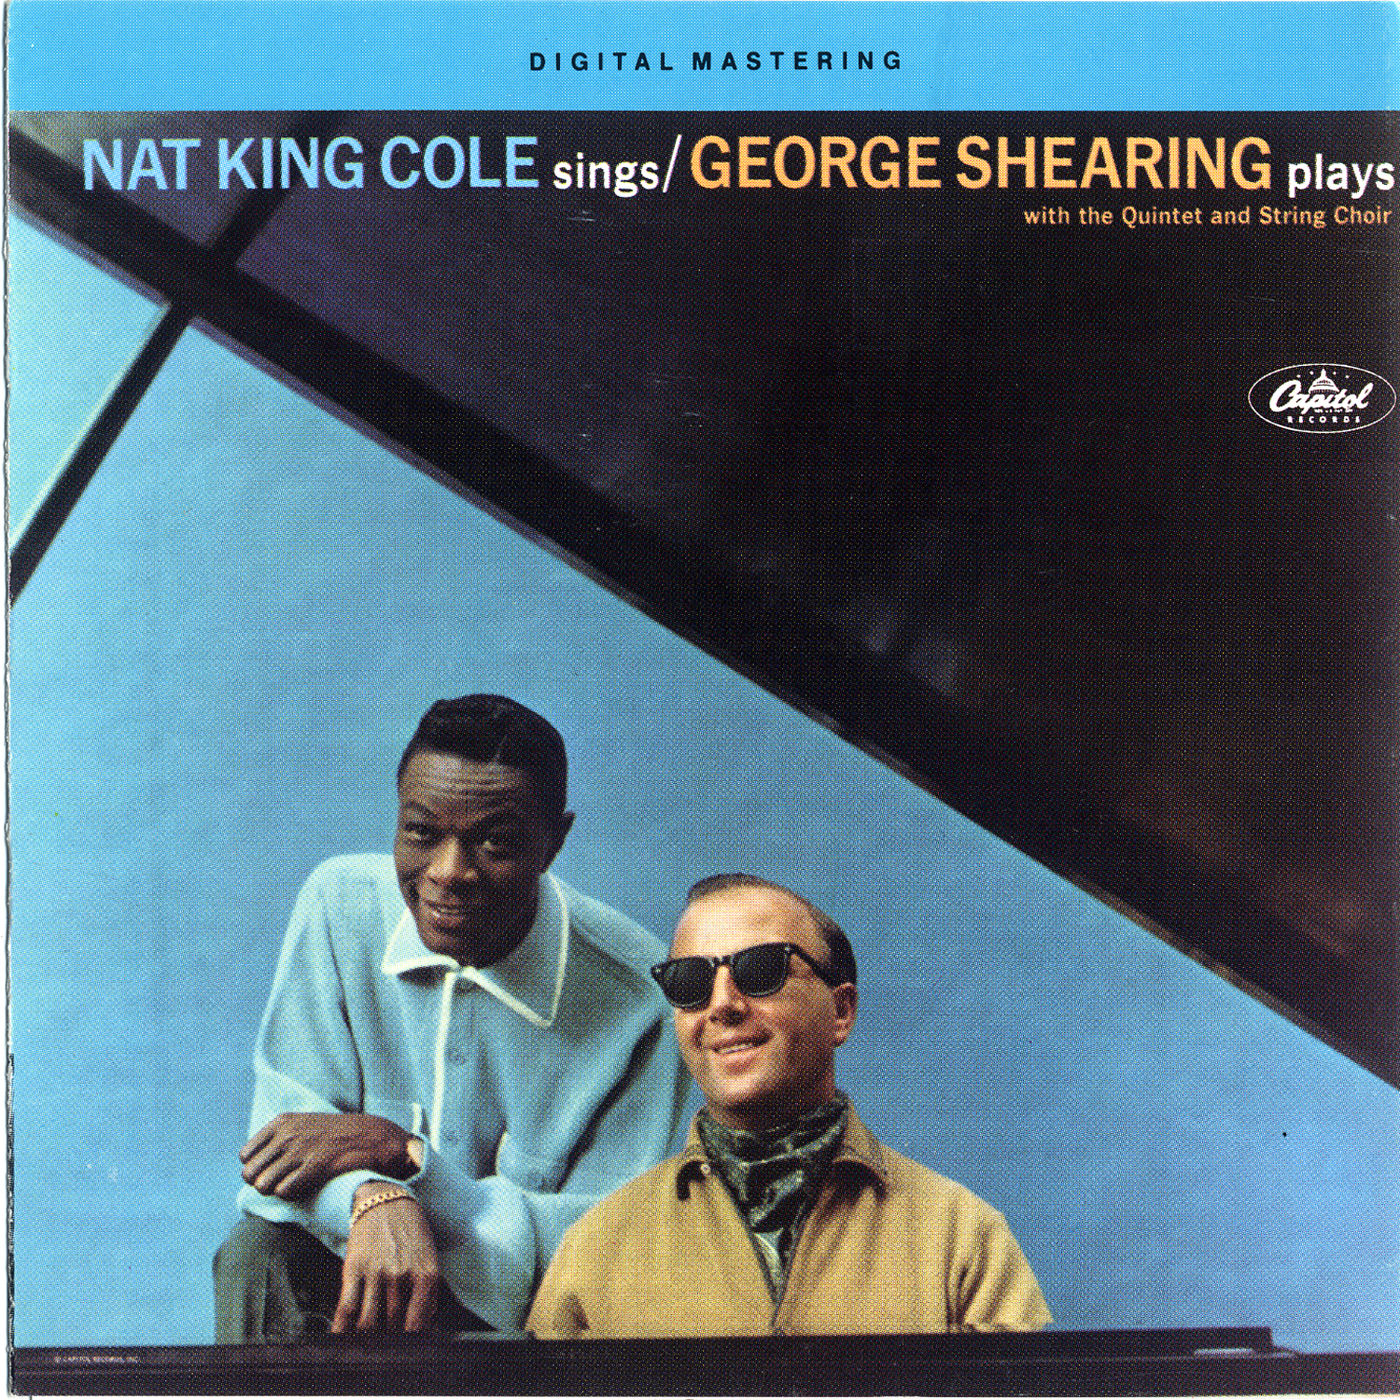 Nat King Cole - Nat King Cole Sings - George Shearing Plays (1962/2021) [FLAC 24bit/96kHz]